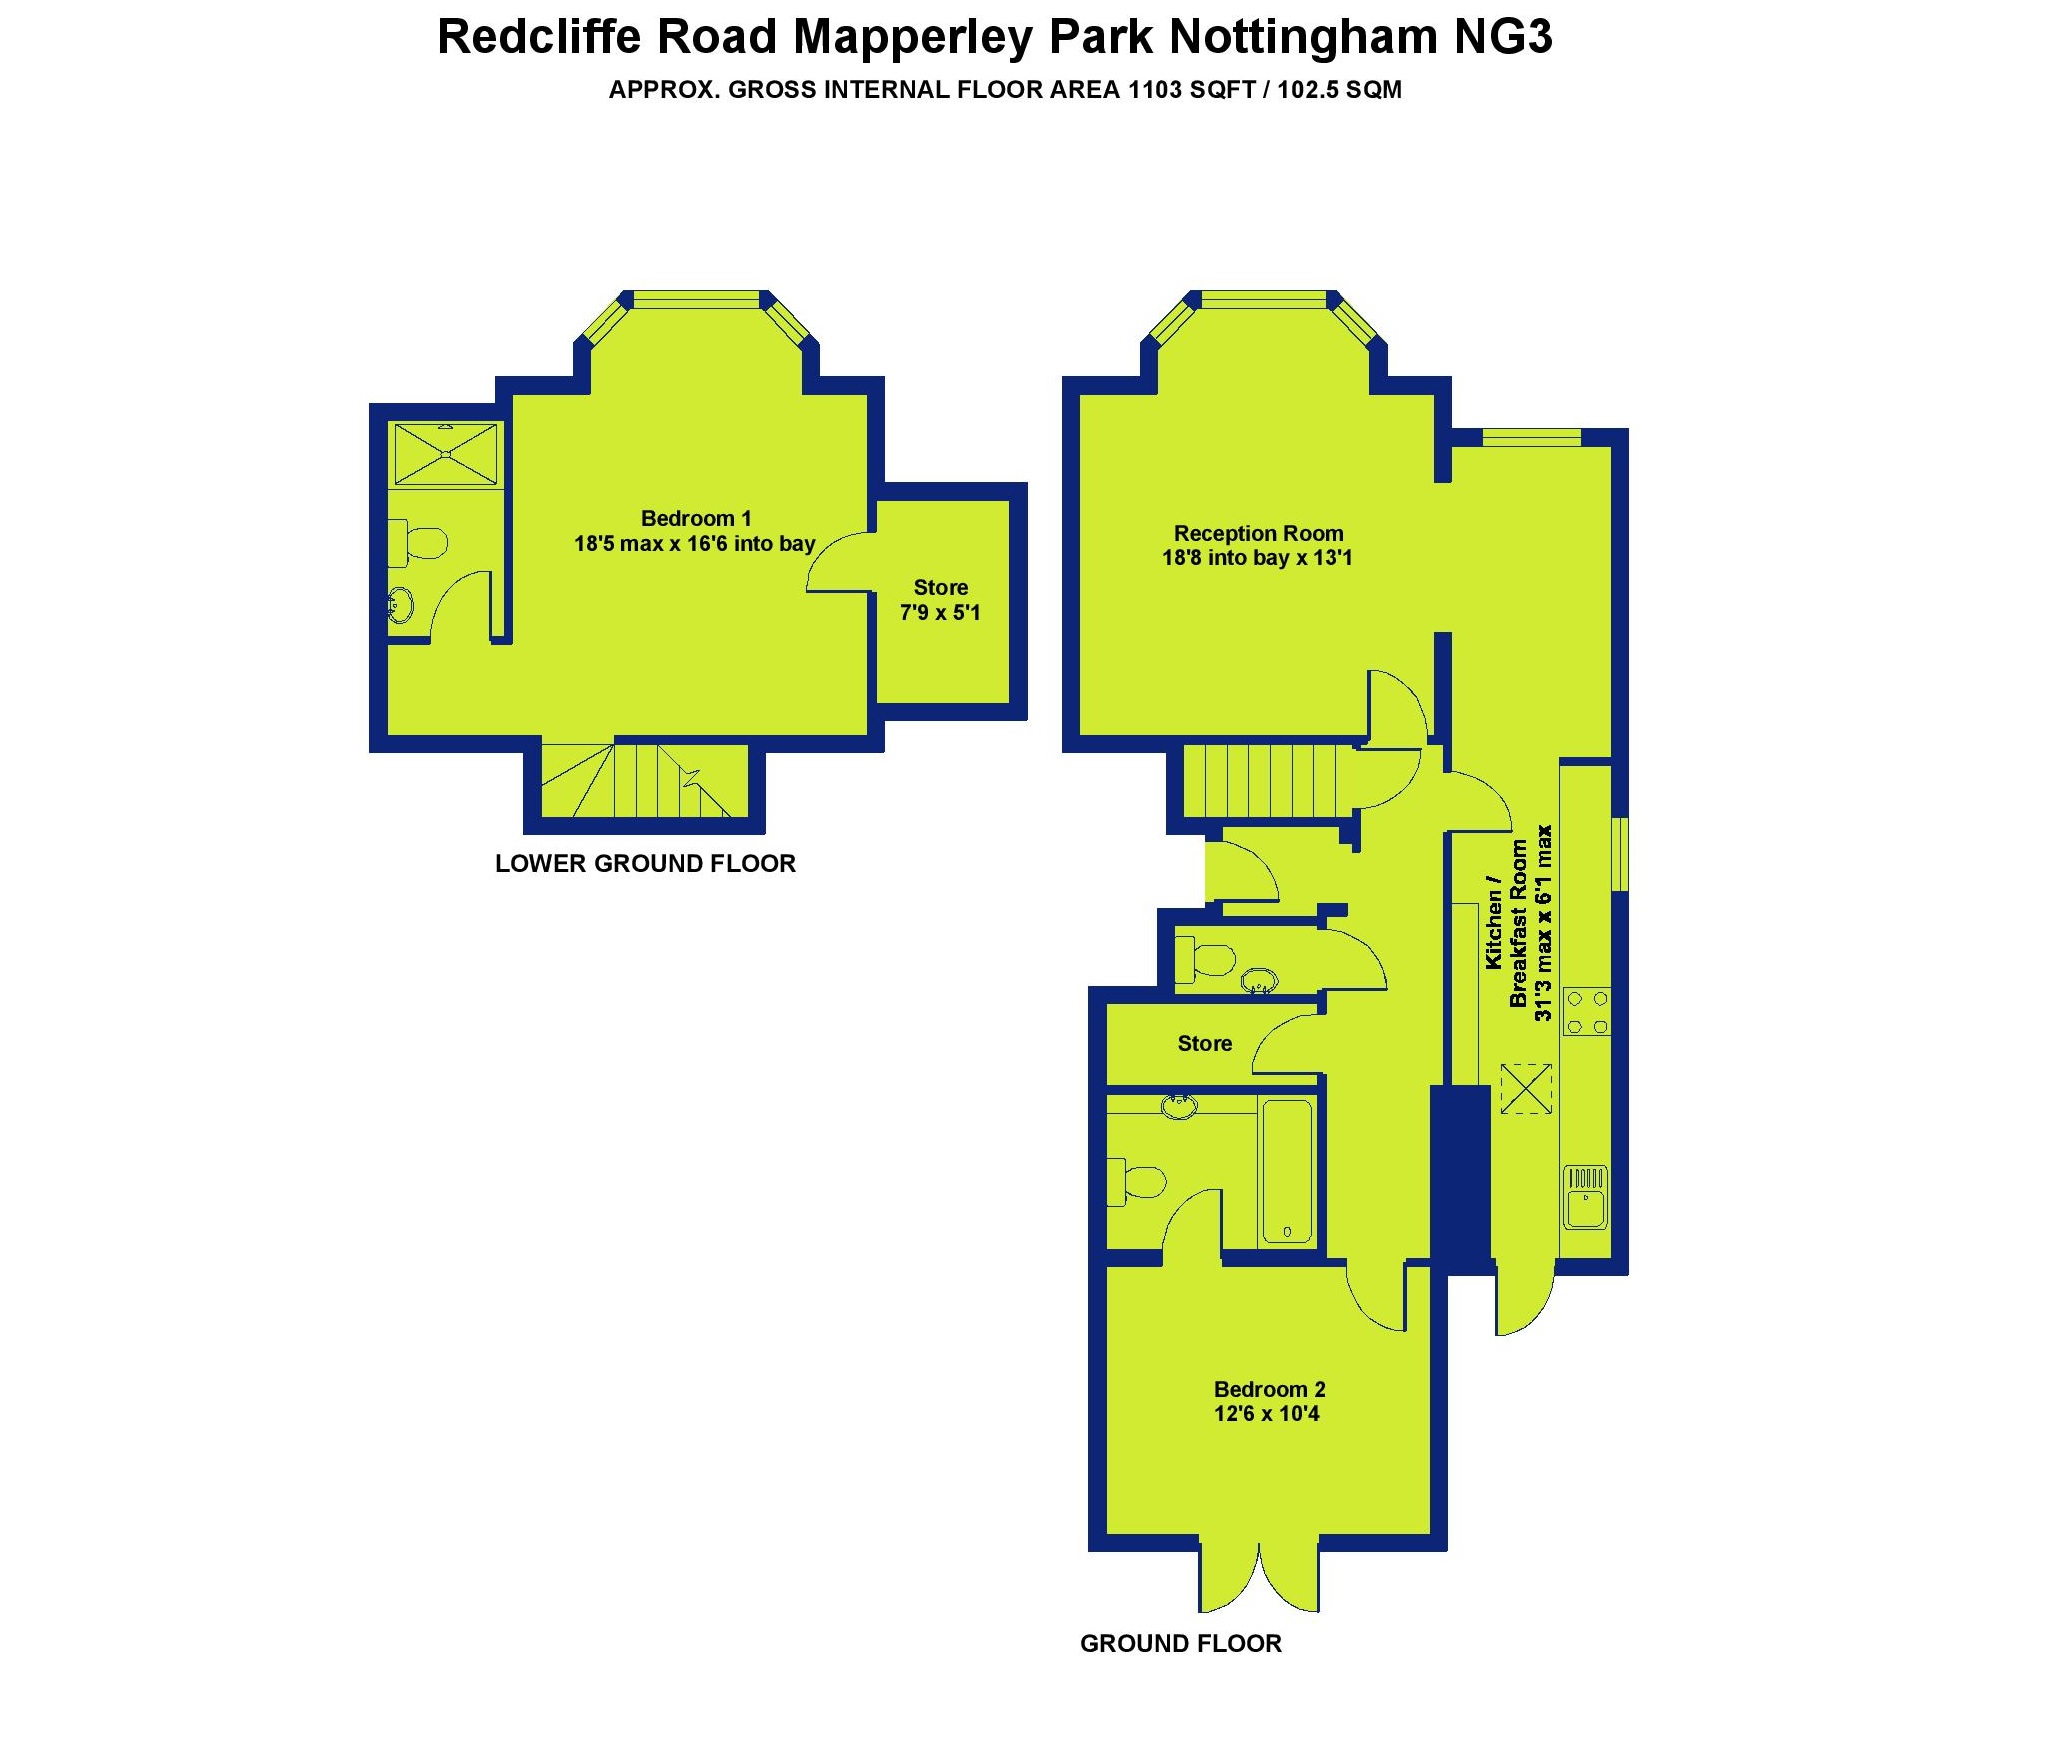 2 Bedrooms Flat to rent in Redcliffe Road, Mapperley Park, Nottingham NG3